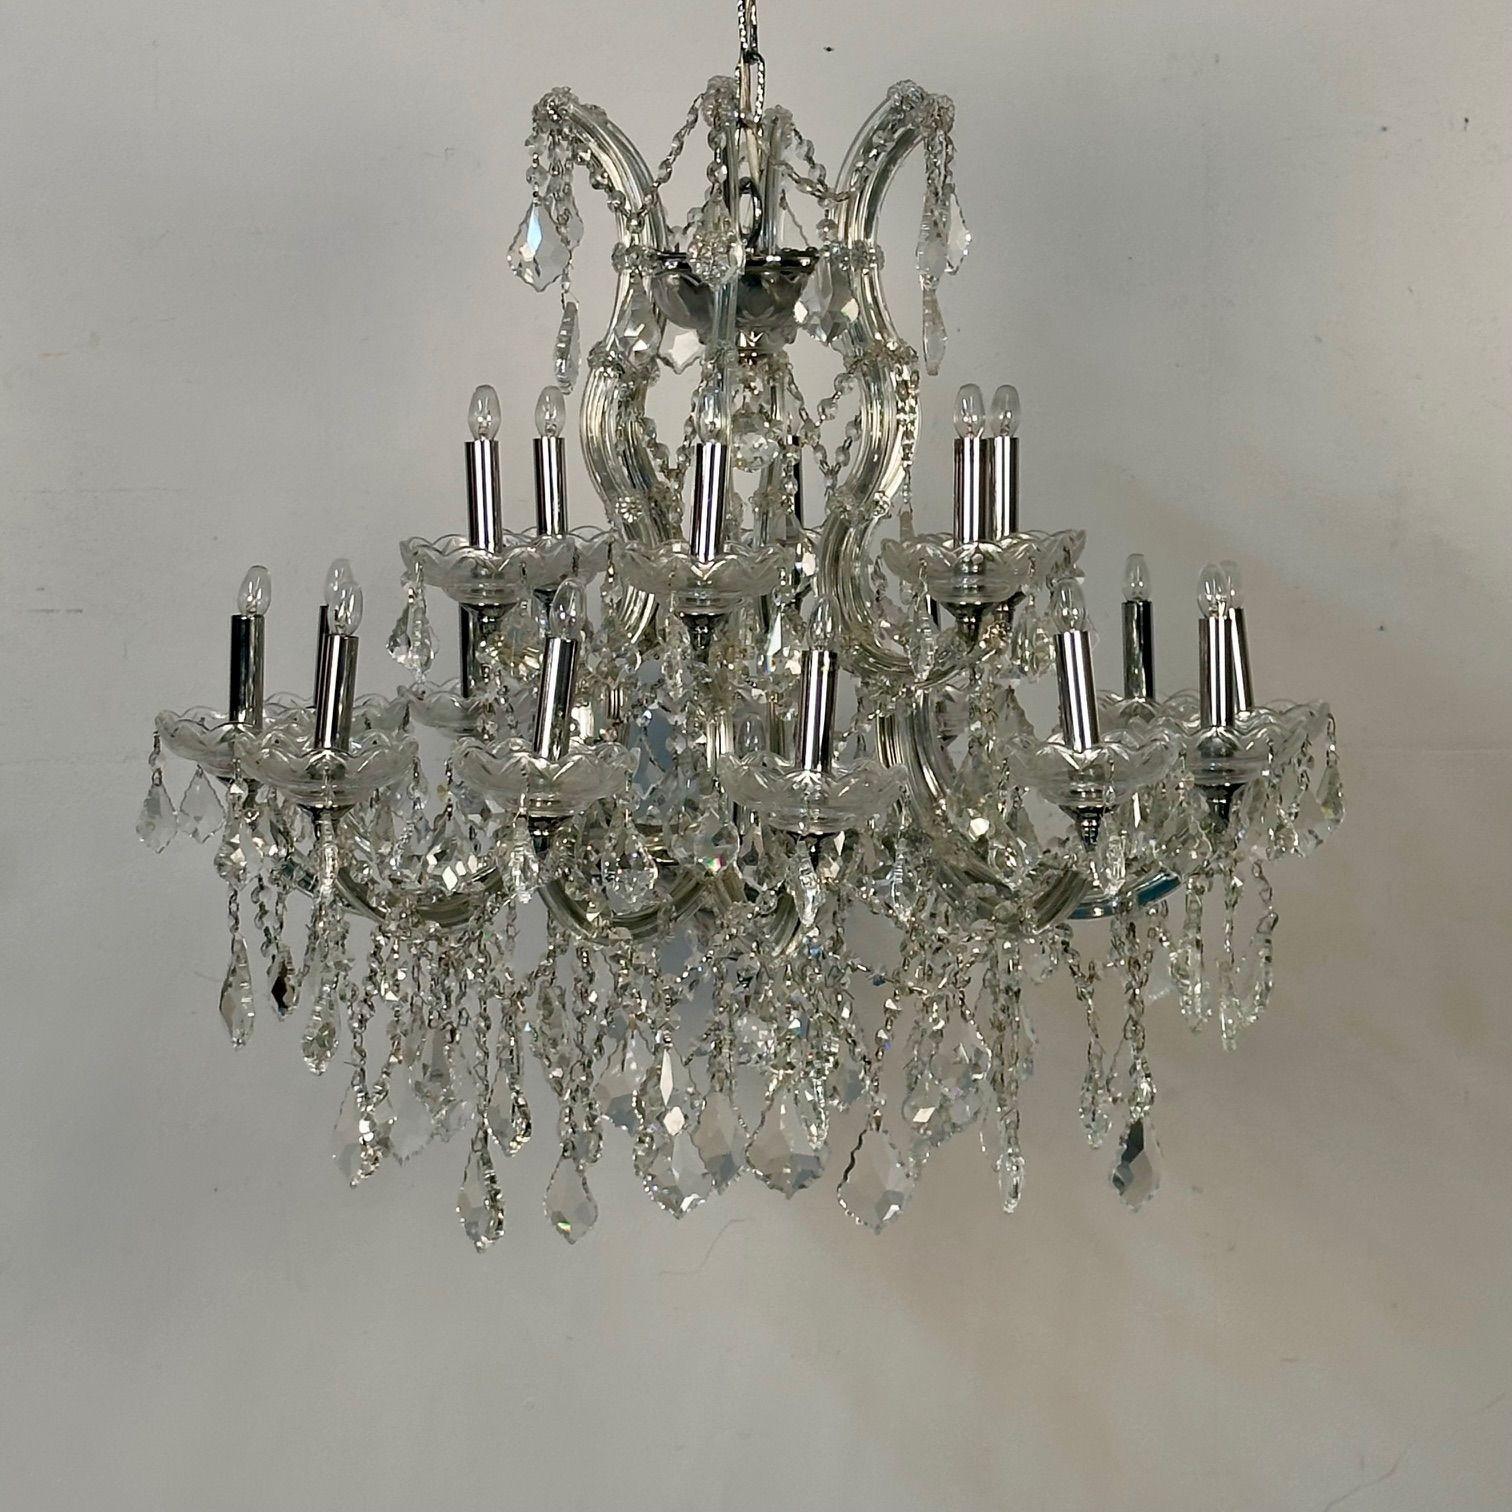 Venetian Style Chandelier Having 19 Lights, Crystal and Chrome

A decorative and finely cut crystal chandelier having 12 lighted arms on the bottom and 6 lighted arms on top with one single center light in the lower tier. From a Greenwich CT estate